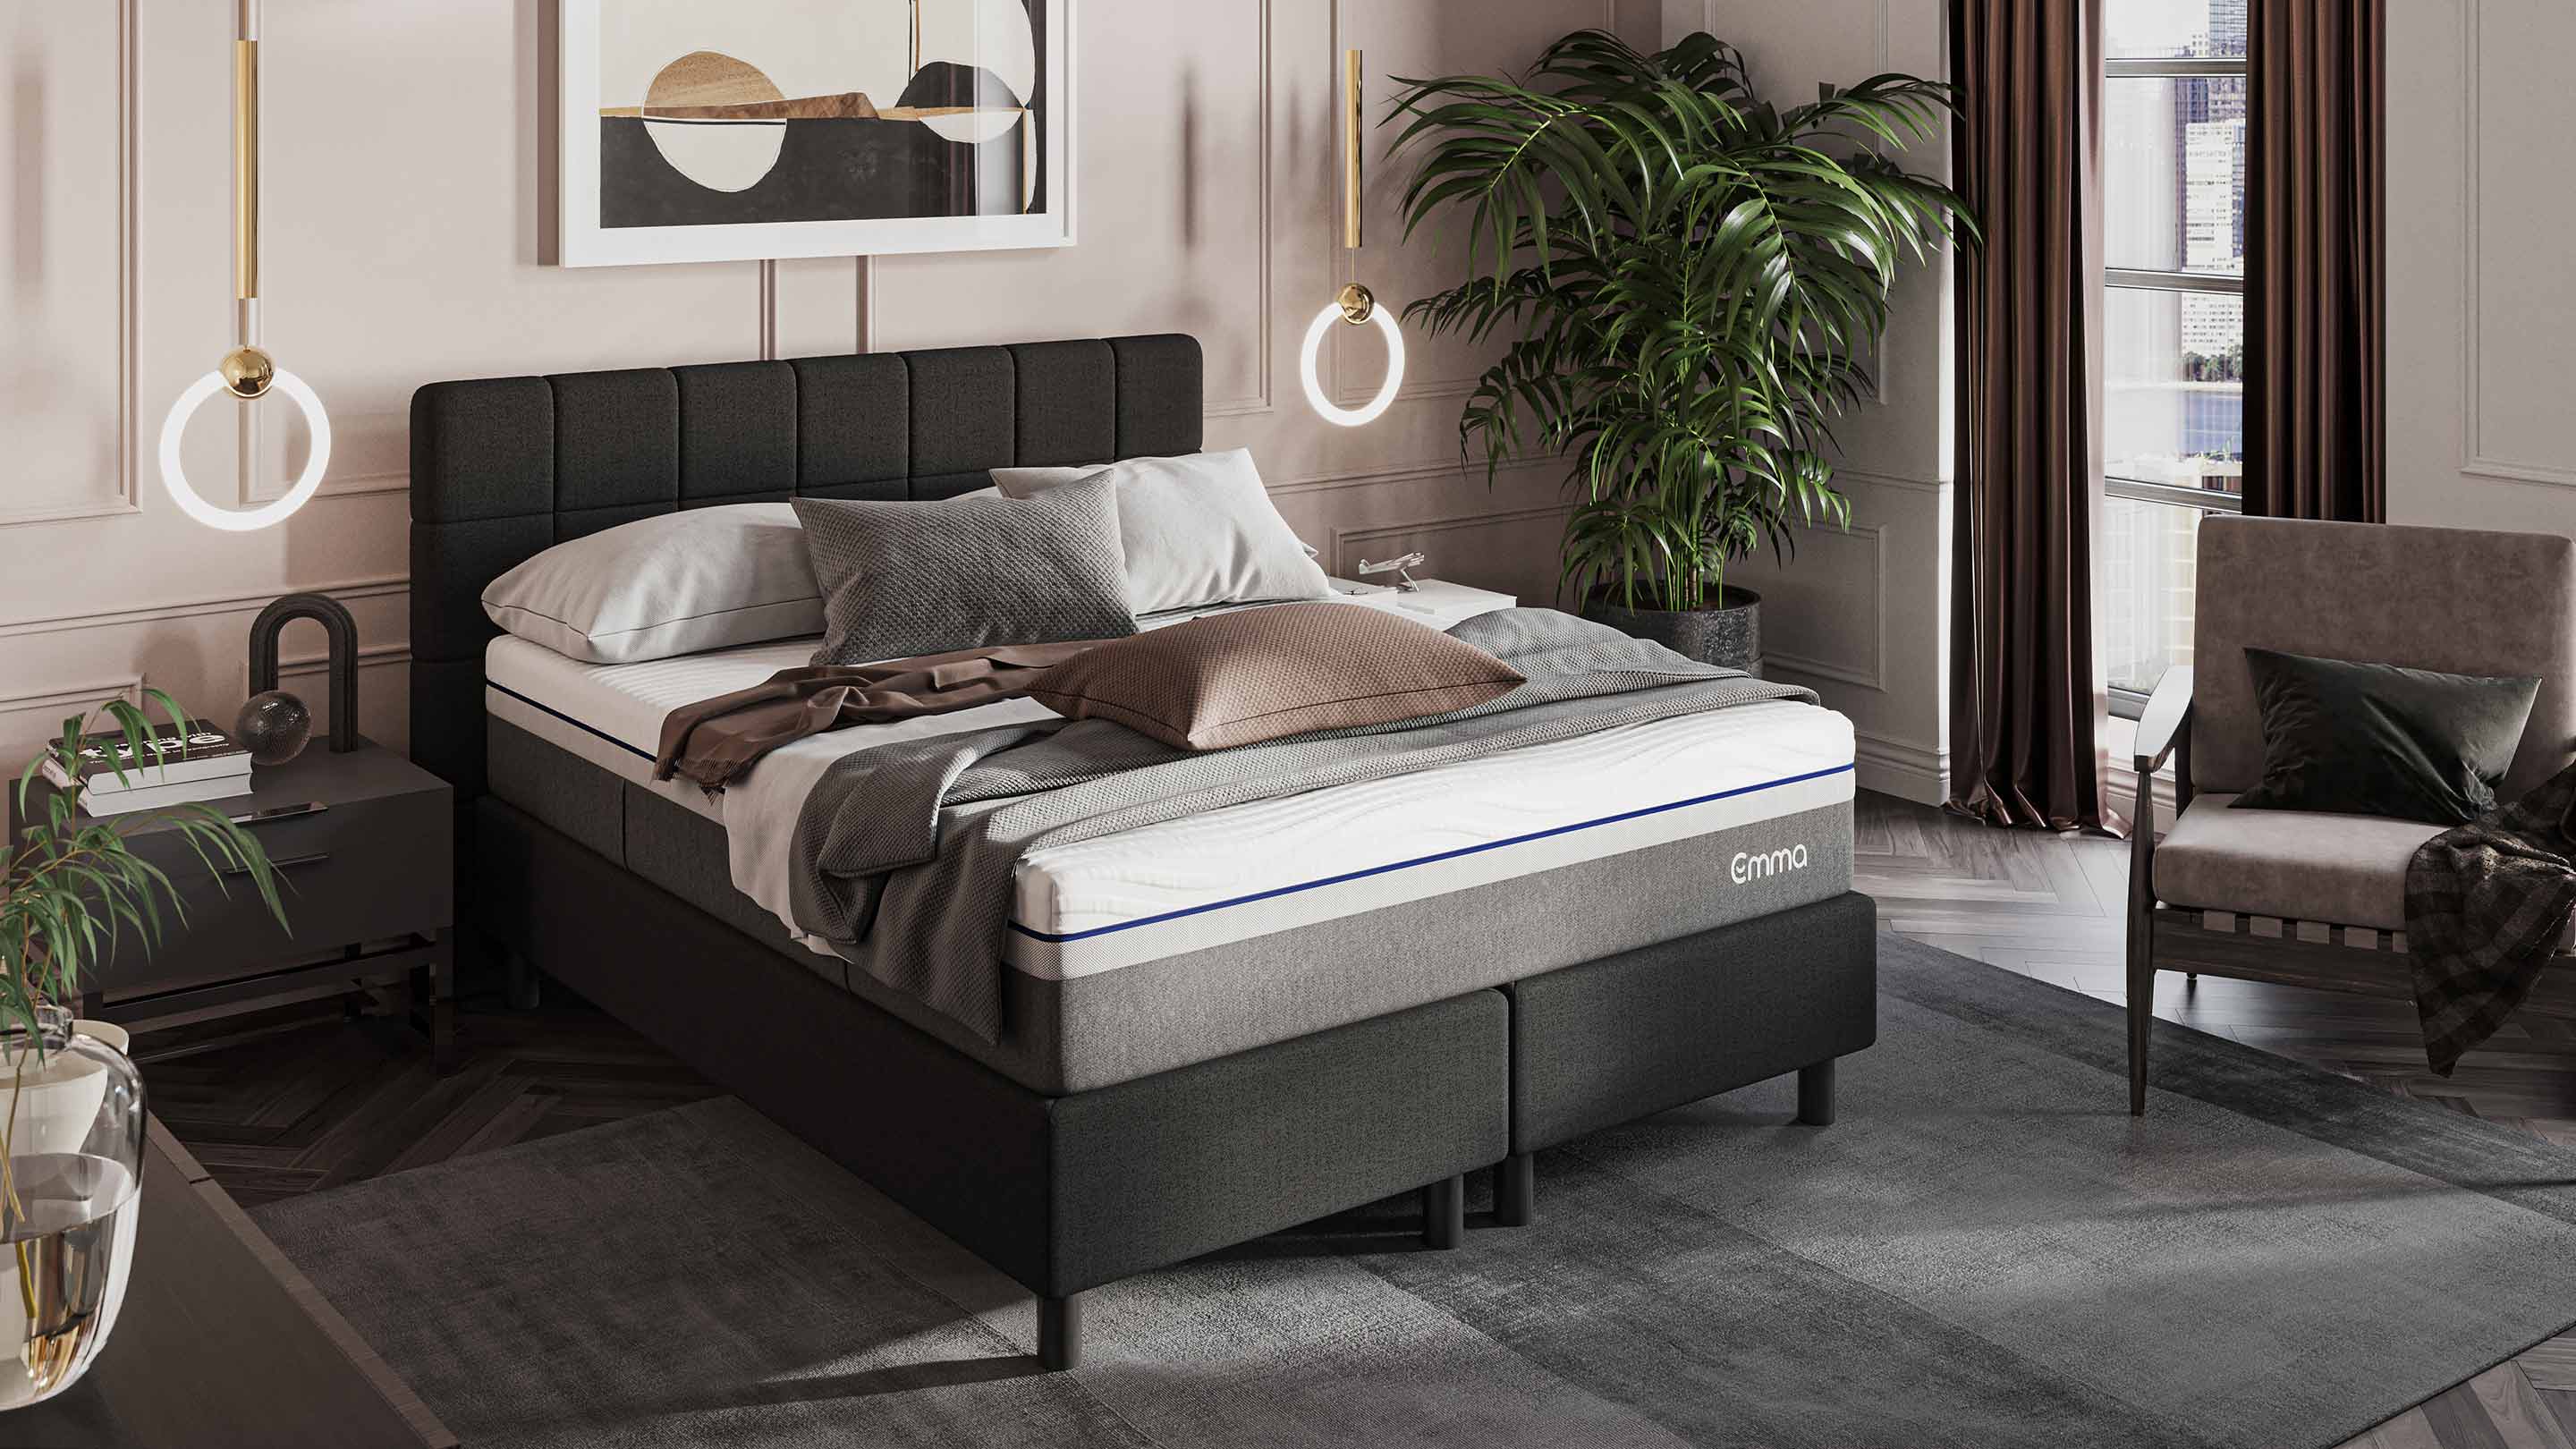 product image of the Emma ComfortAdapt Hybrid Mattress Review